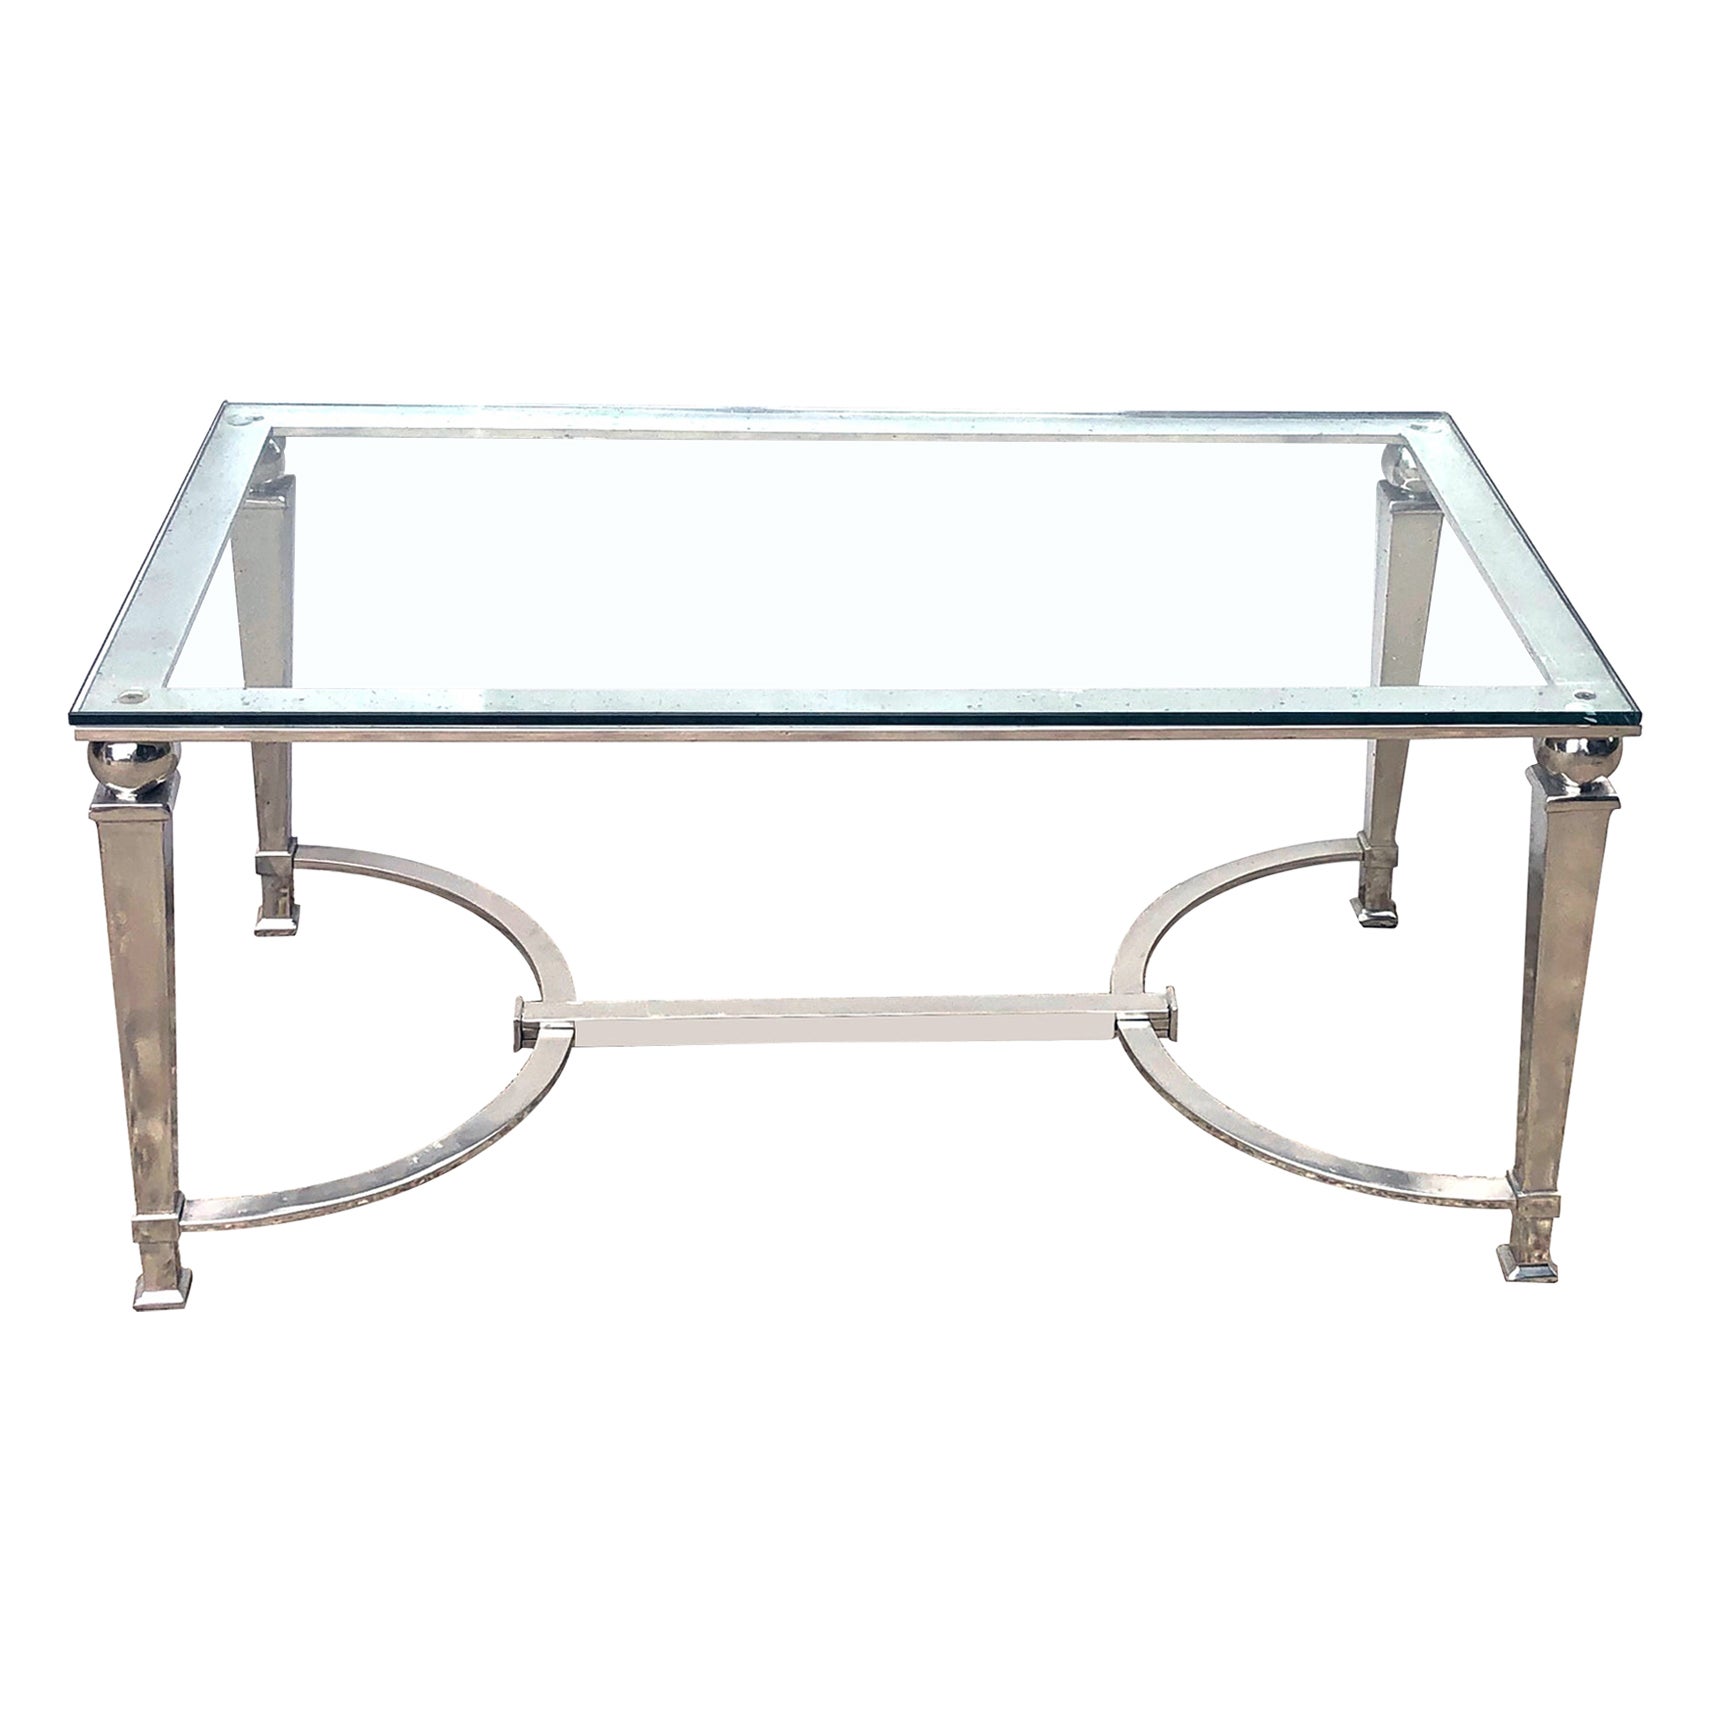 A French Neoclassical Style Chrome Rectangular Coffee Table with Glass Top For Sale